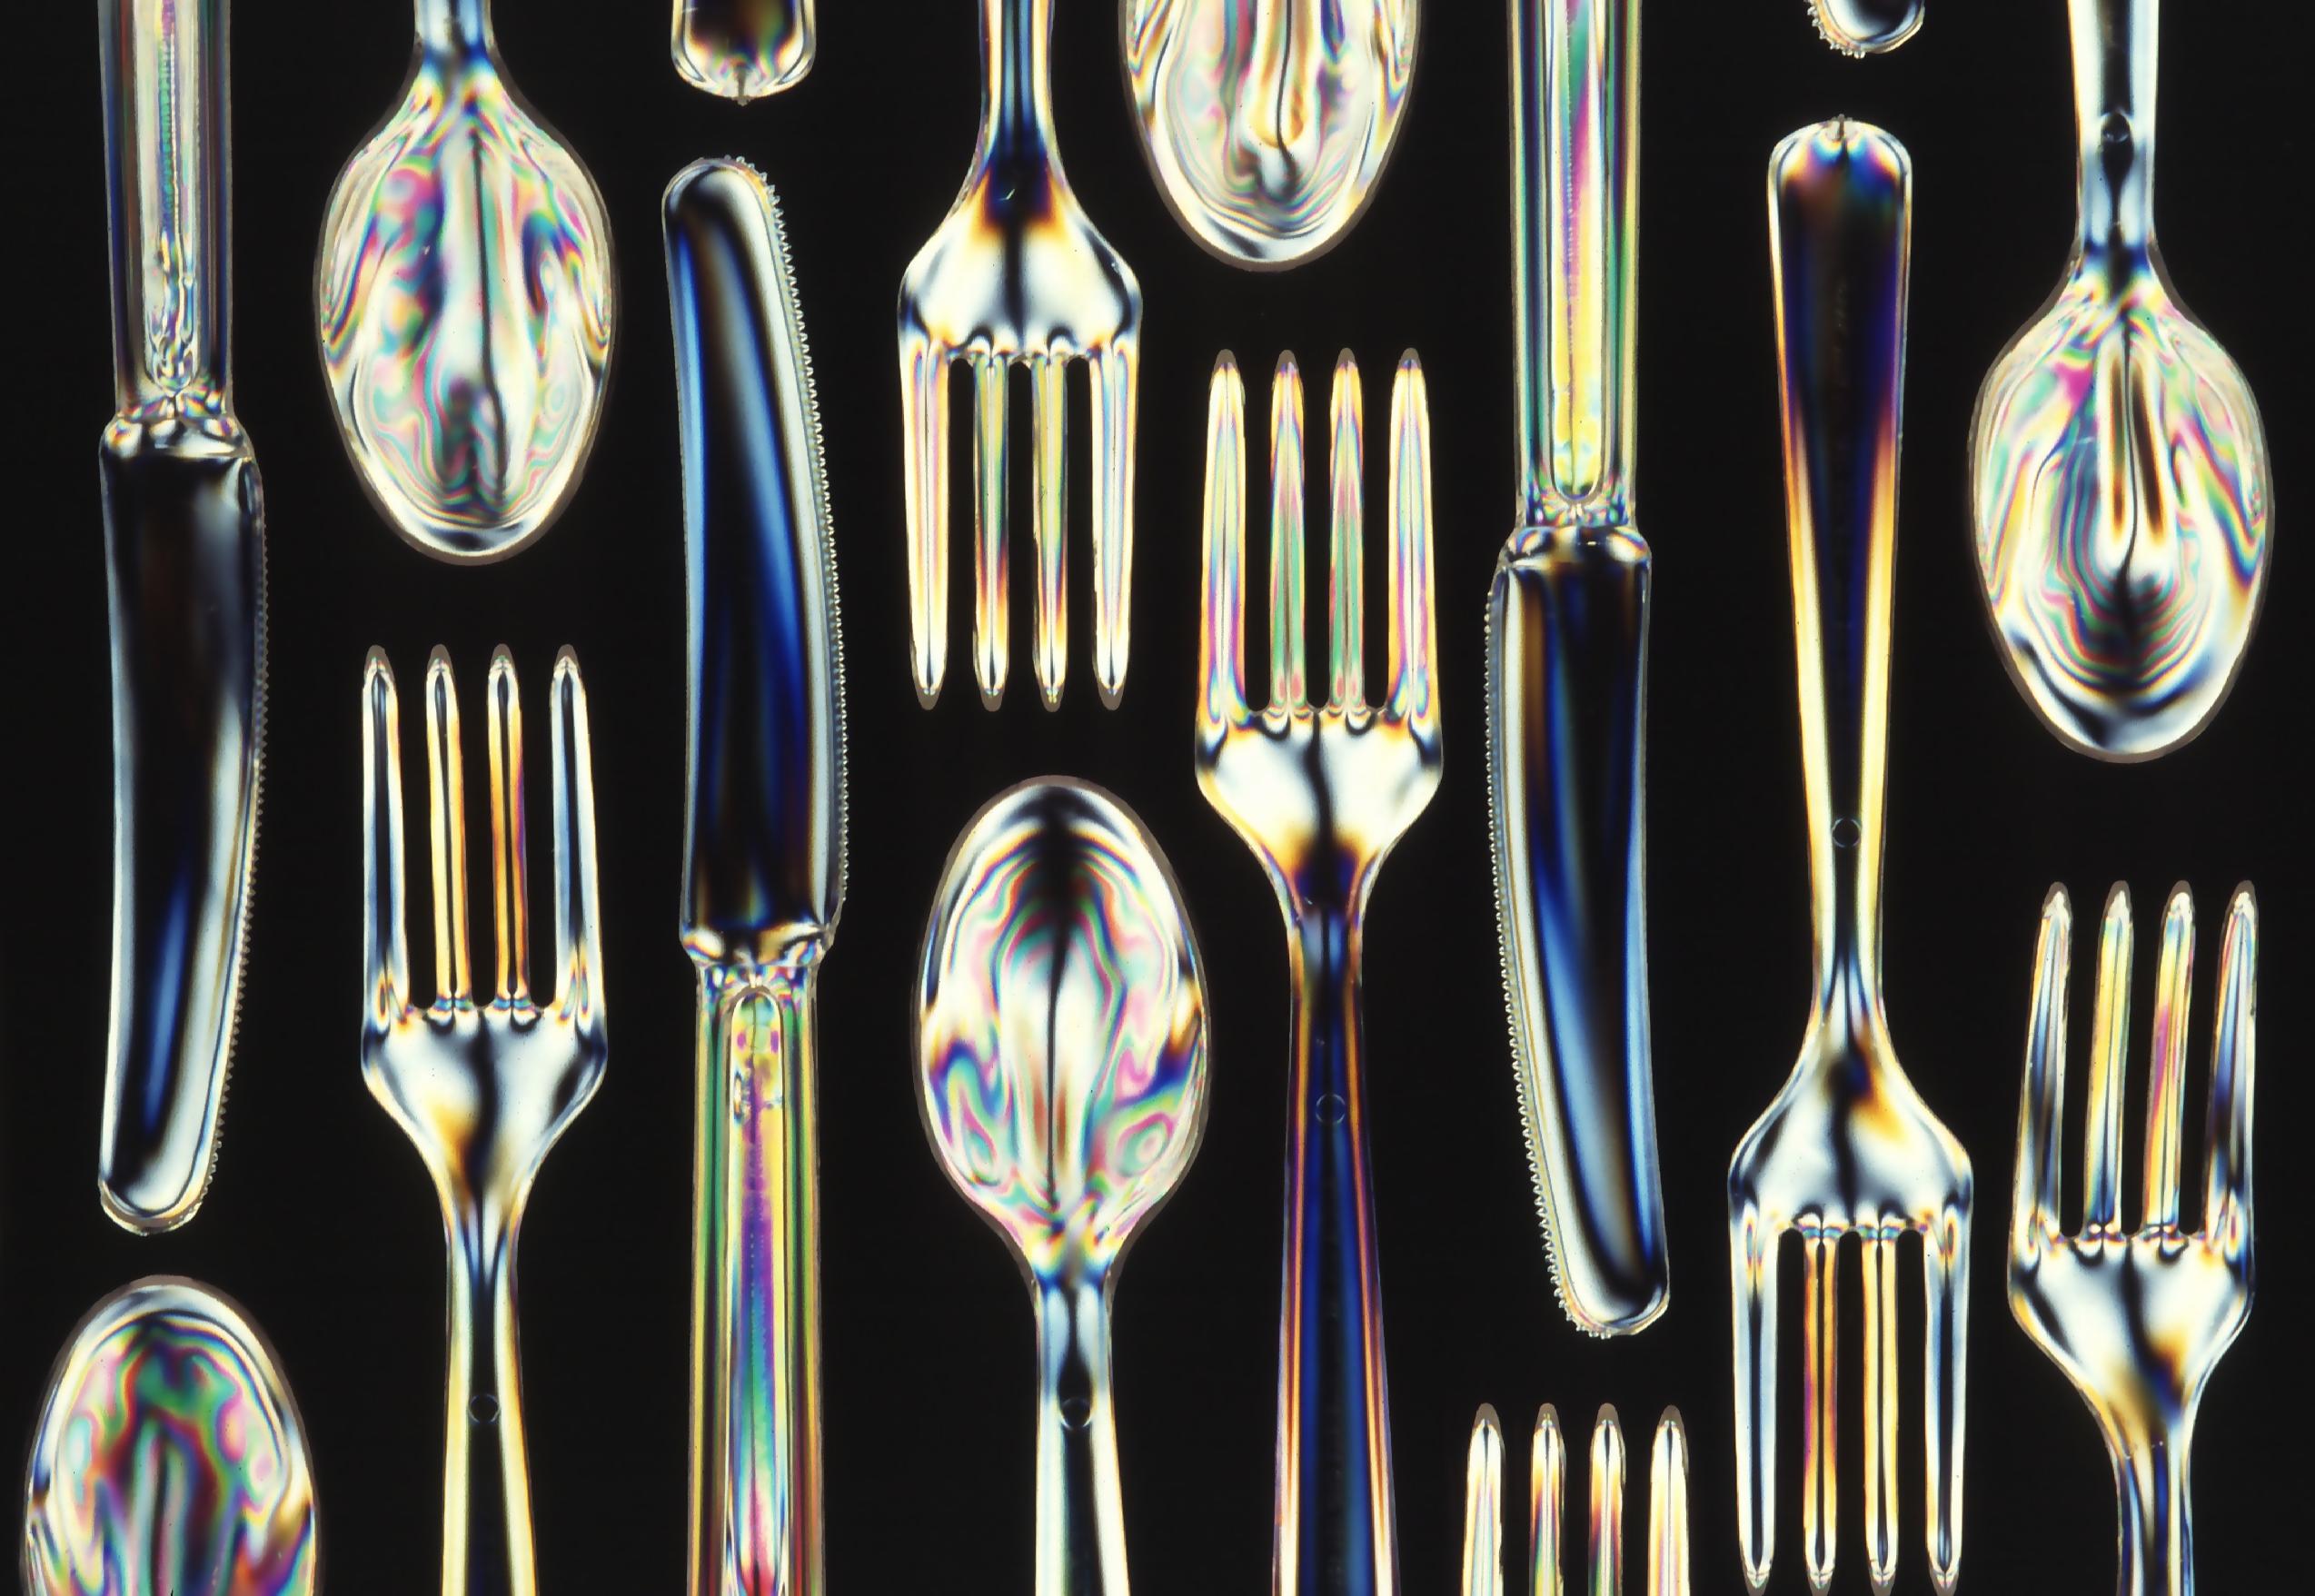 An image of plastic cutlery